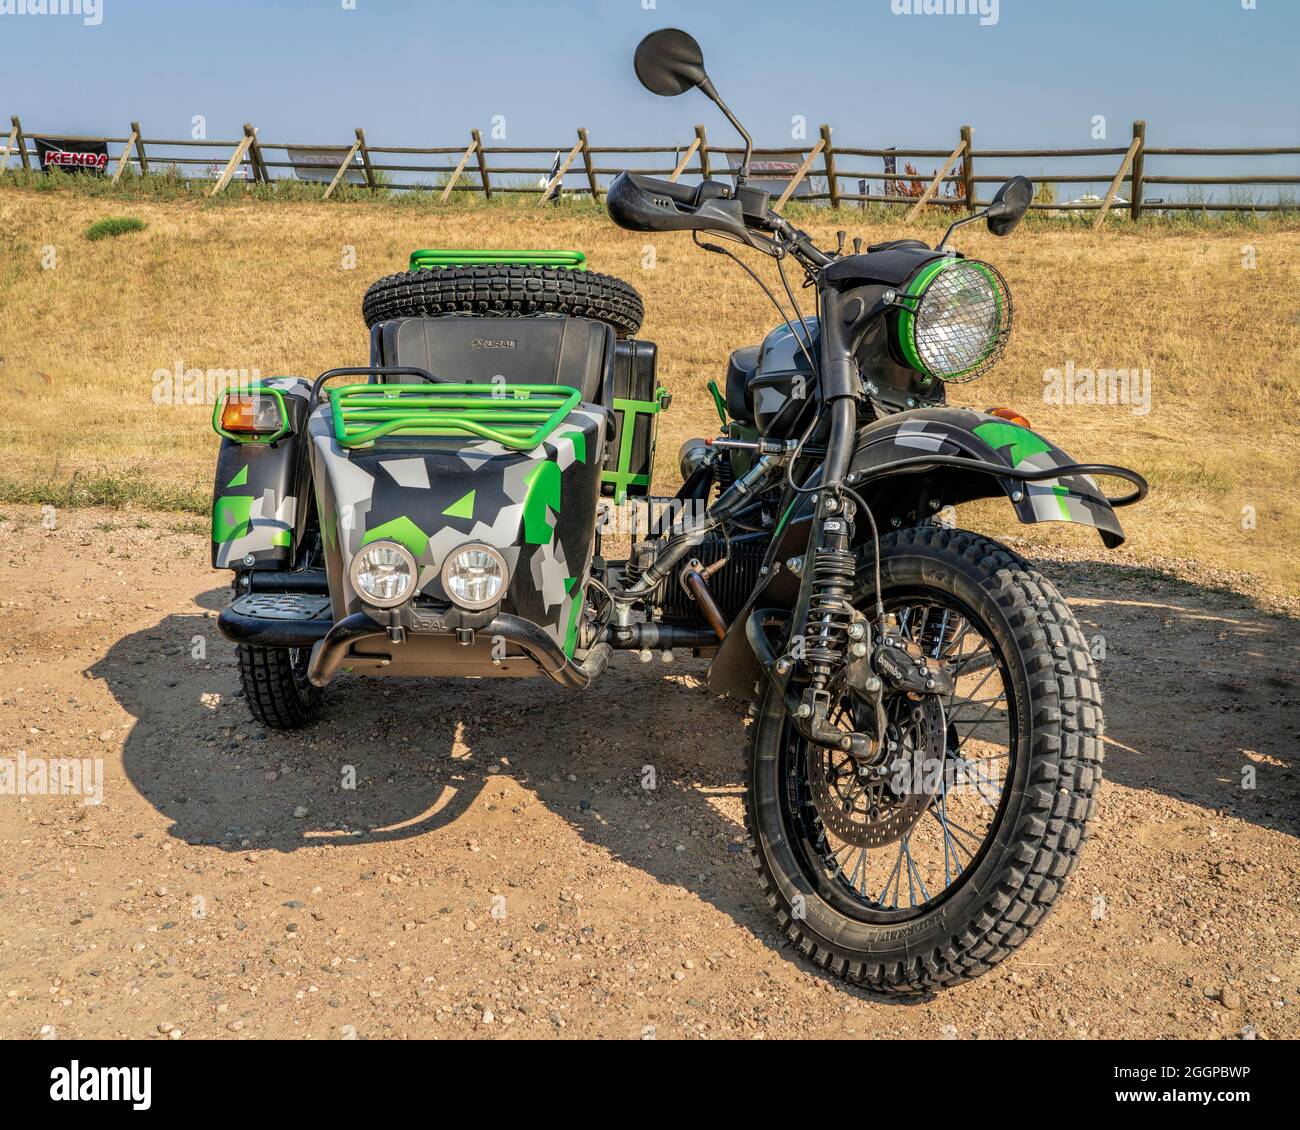 Loveland, CO, USA - August 29, 2021:  Russian made Ural motorcycle with a sidecar adopted for touring and adventure. Stock Photo